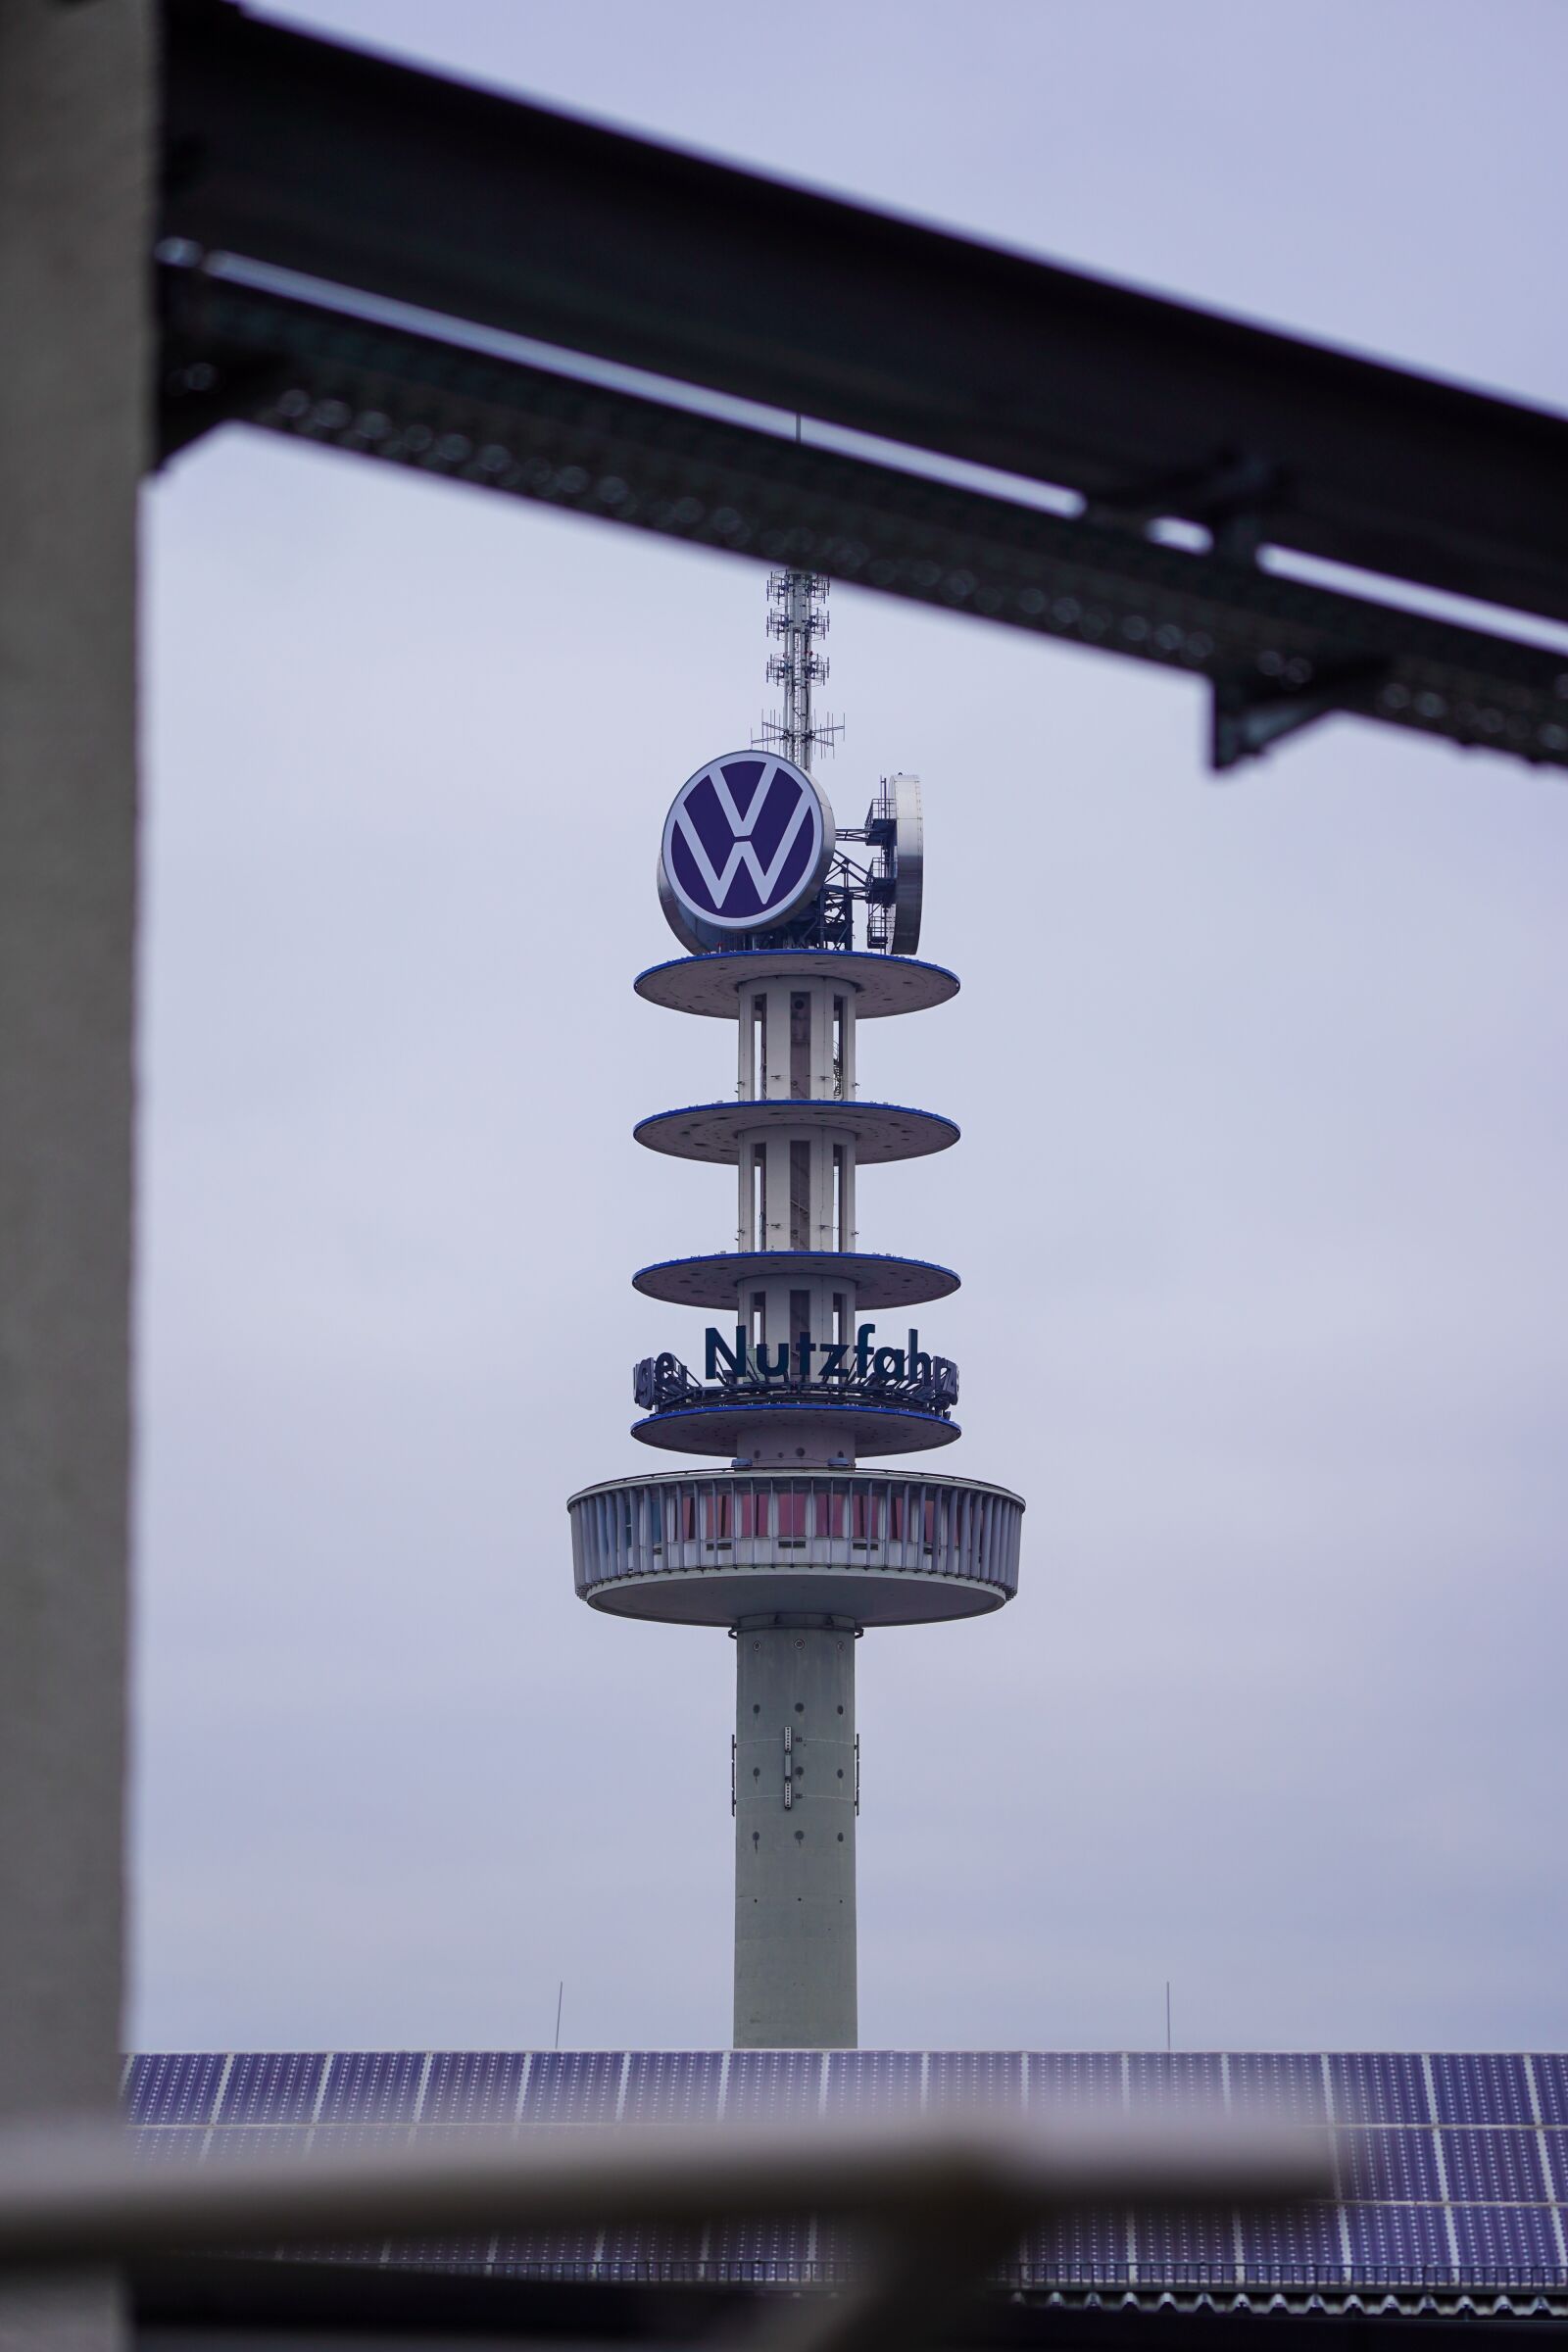 Sony a7 III sample photo. Volkswagen, car, tower photography